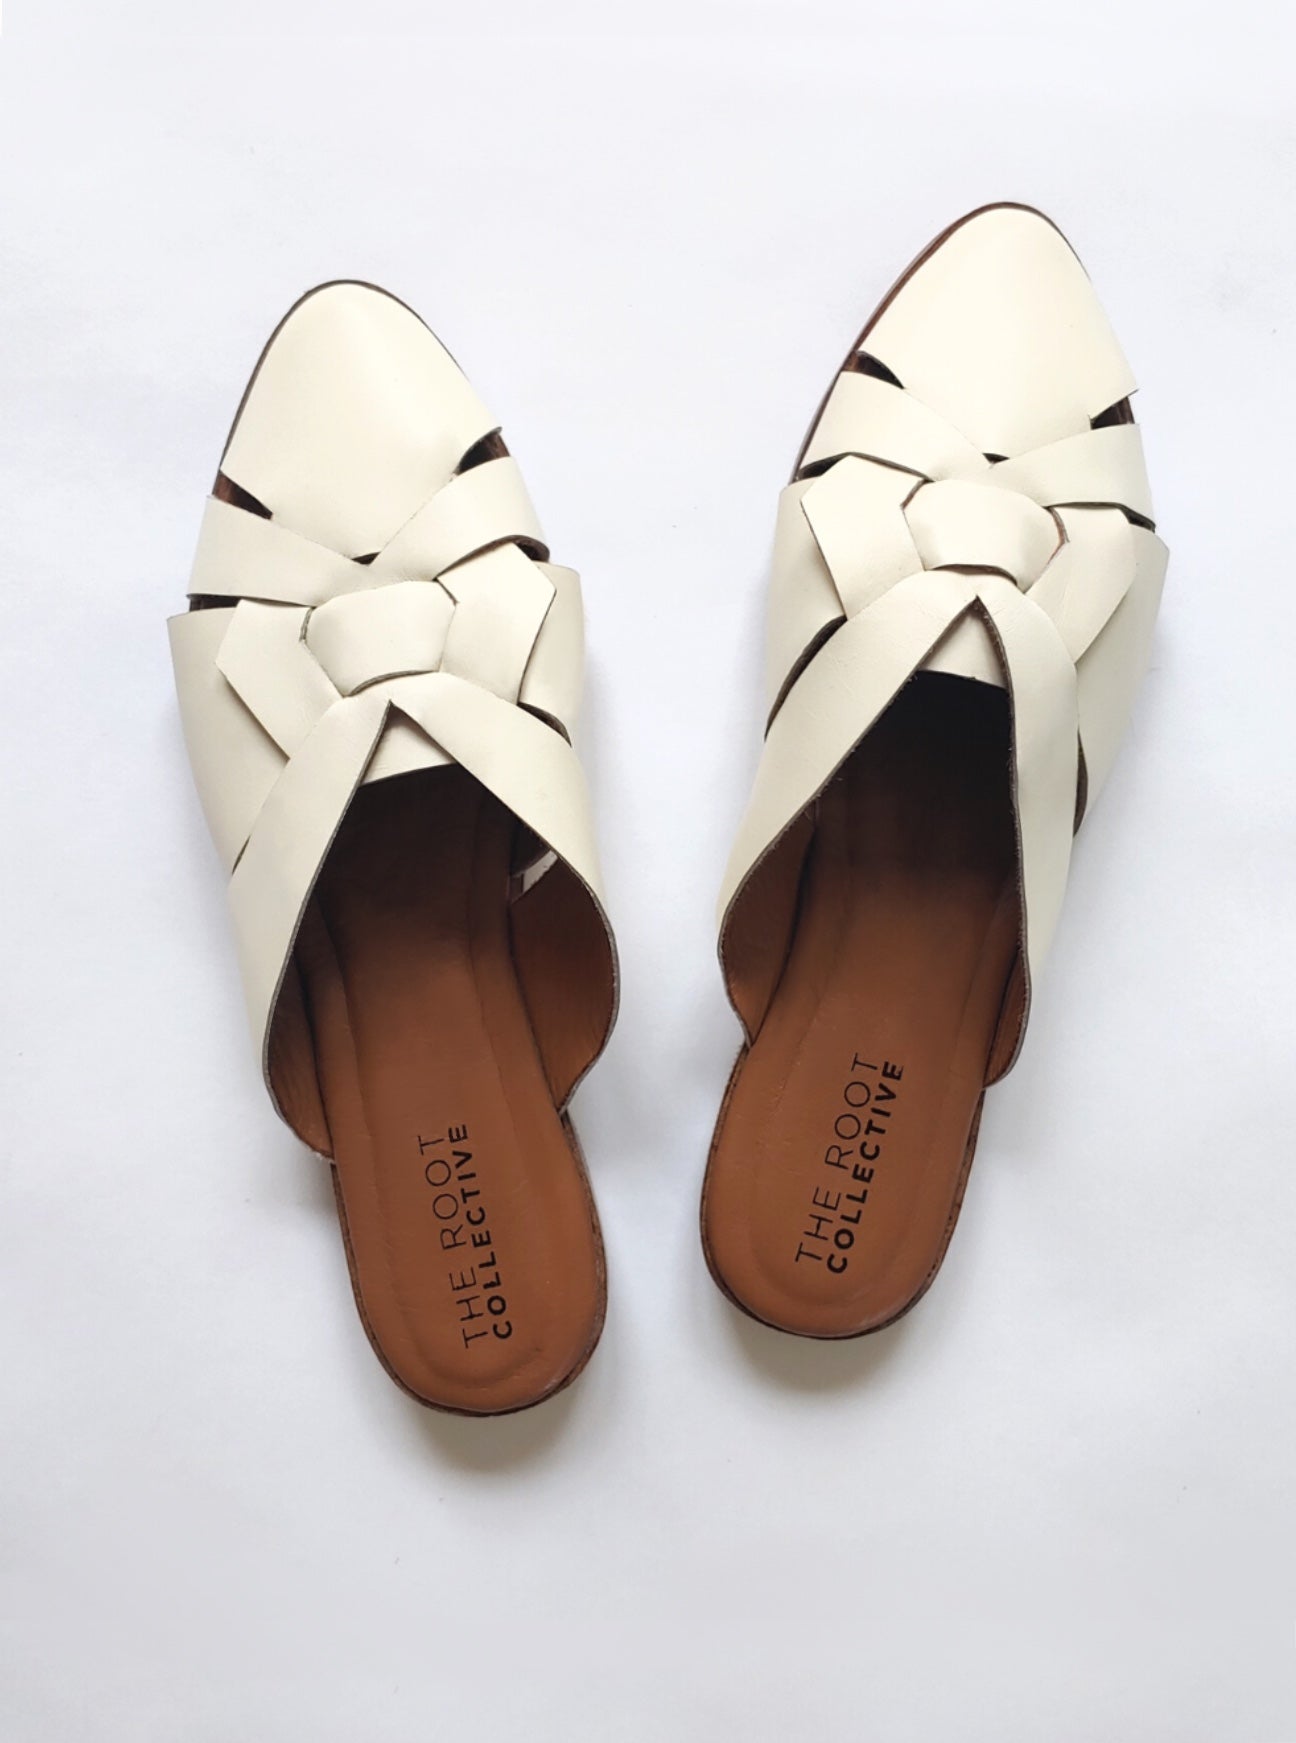 Holly Mule in Cream Leather size 5 - New (FINAL SALE)